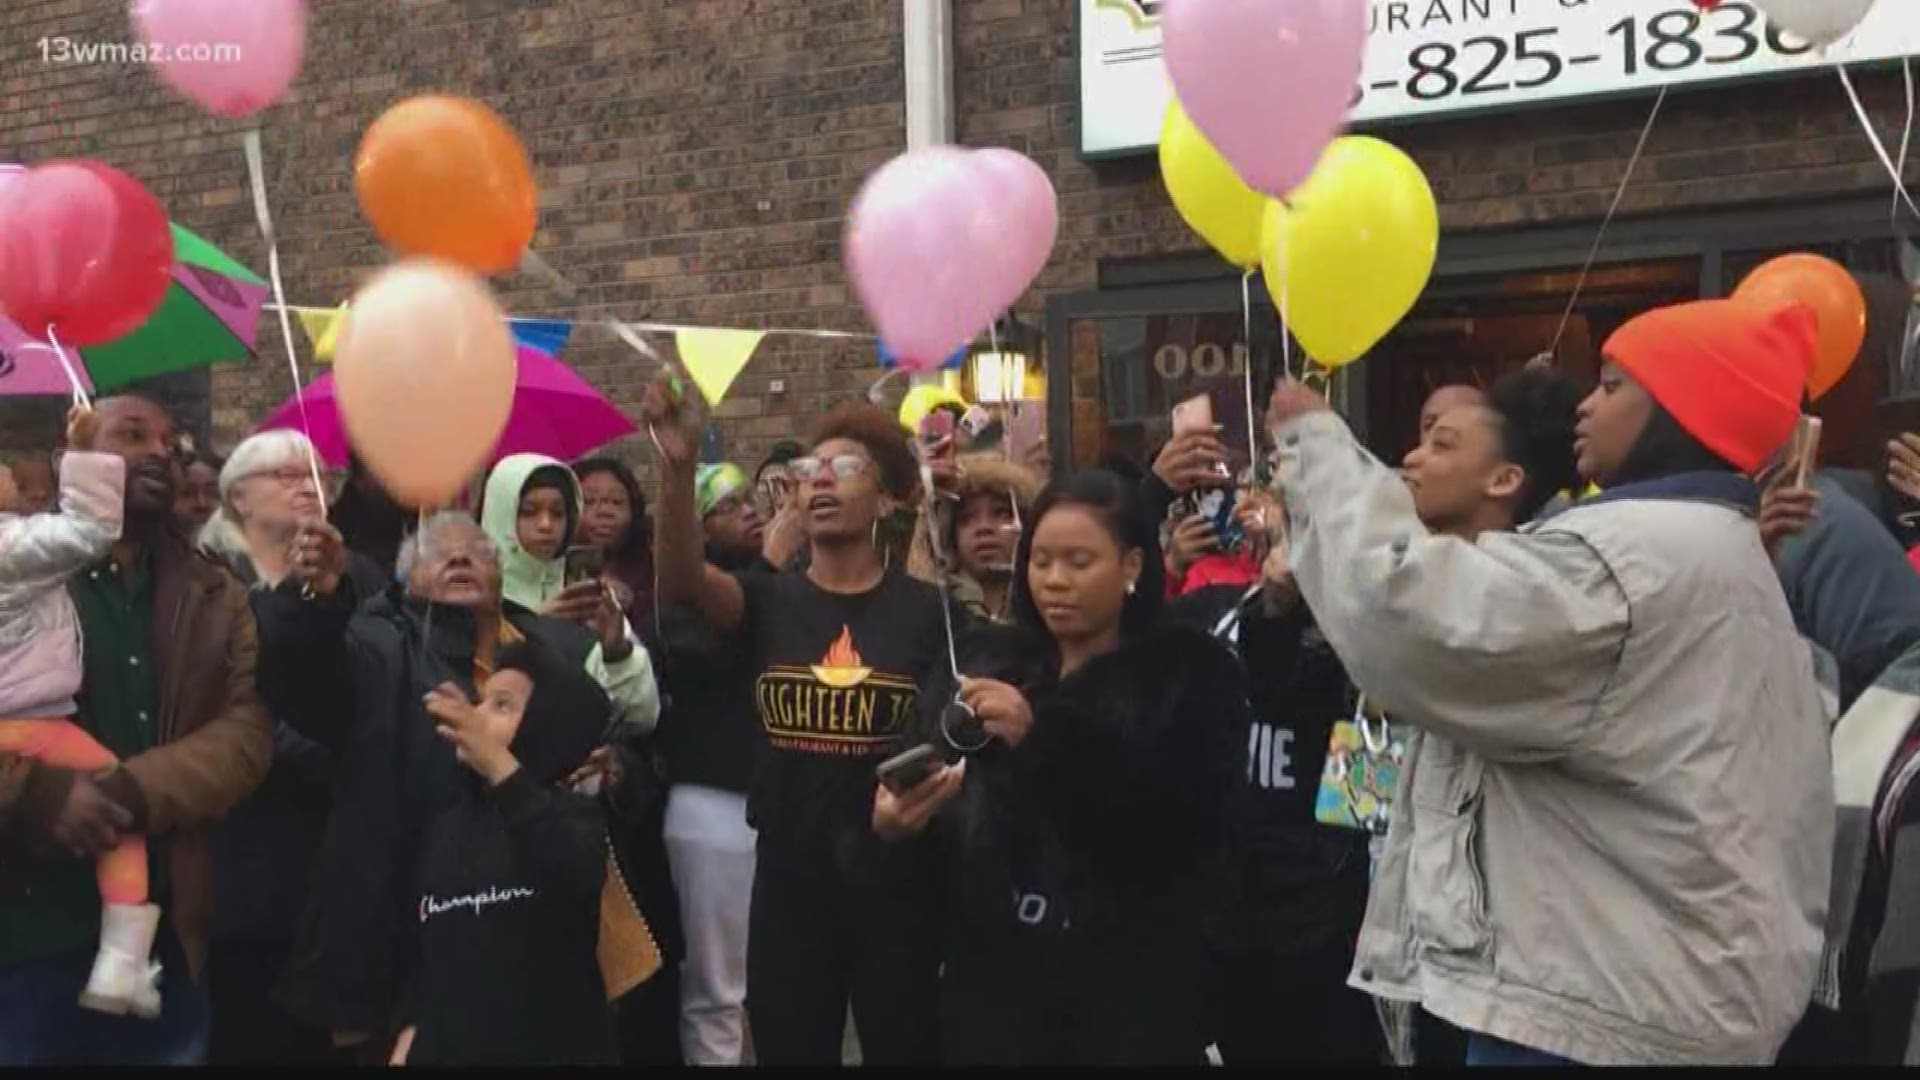 Members of the Fort Valley community came together Thursday night to honor the life of Anitra Gunn. More than 100 people gathered for a balloon release.